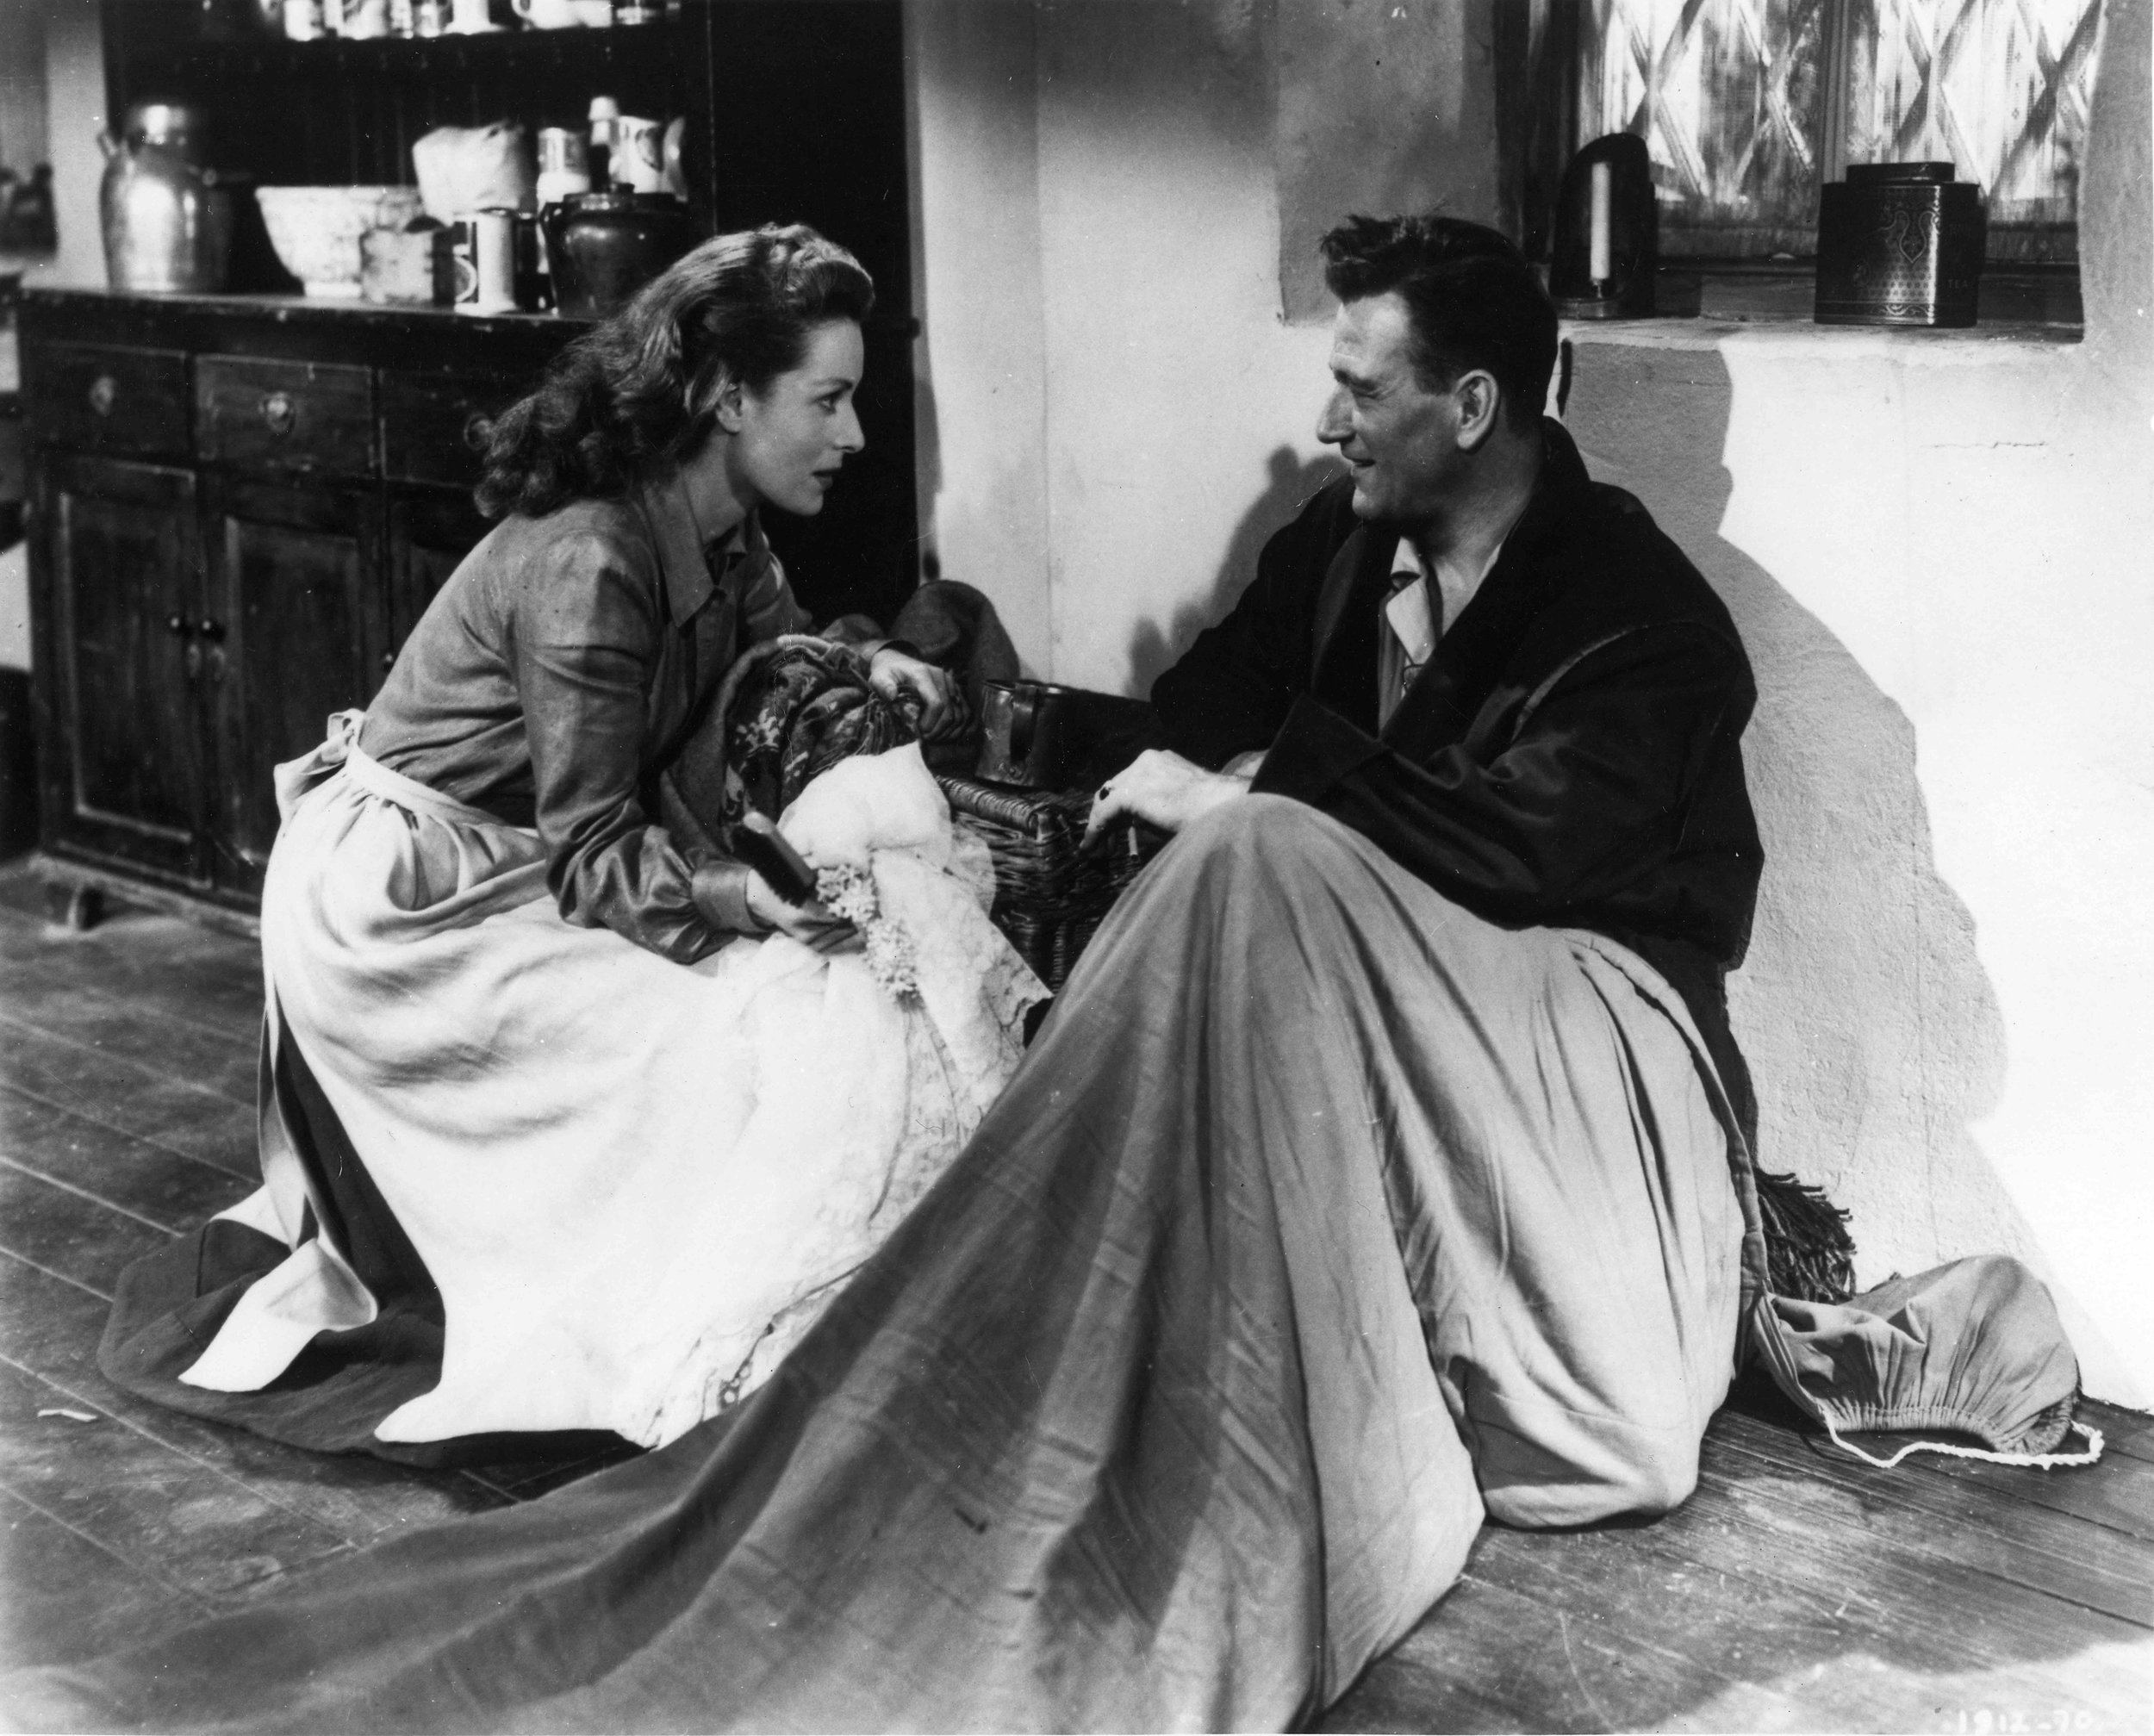 Maureen O’Hara in a scene from The Quiet Man (1952), photo courtesy of Republic Pictures